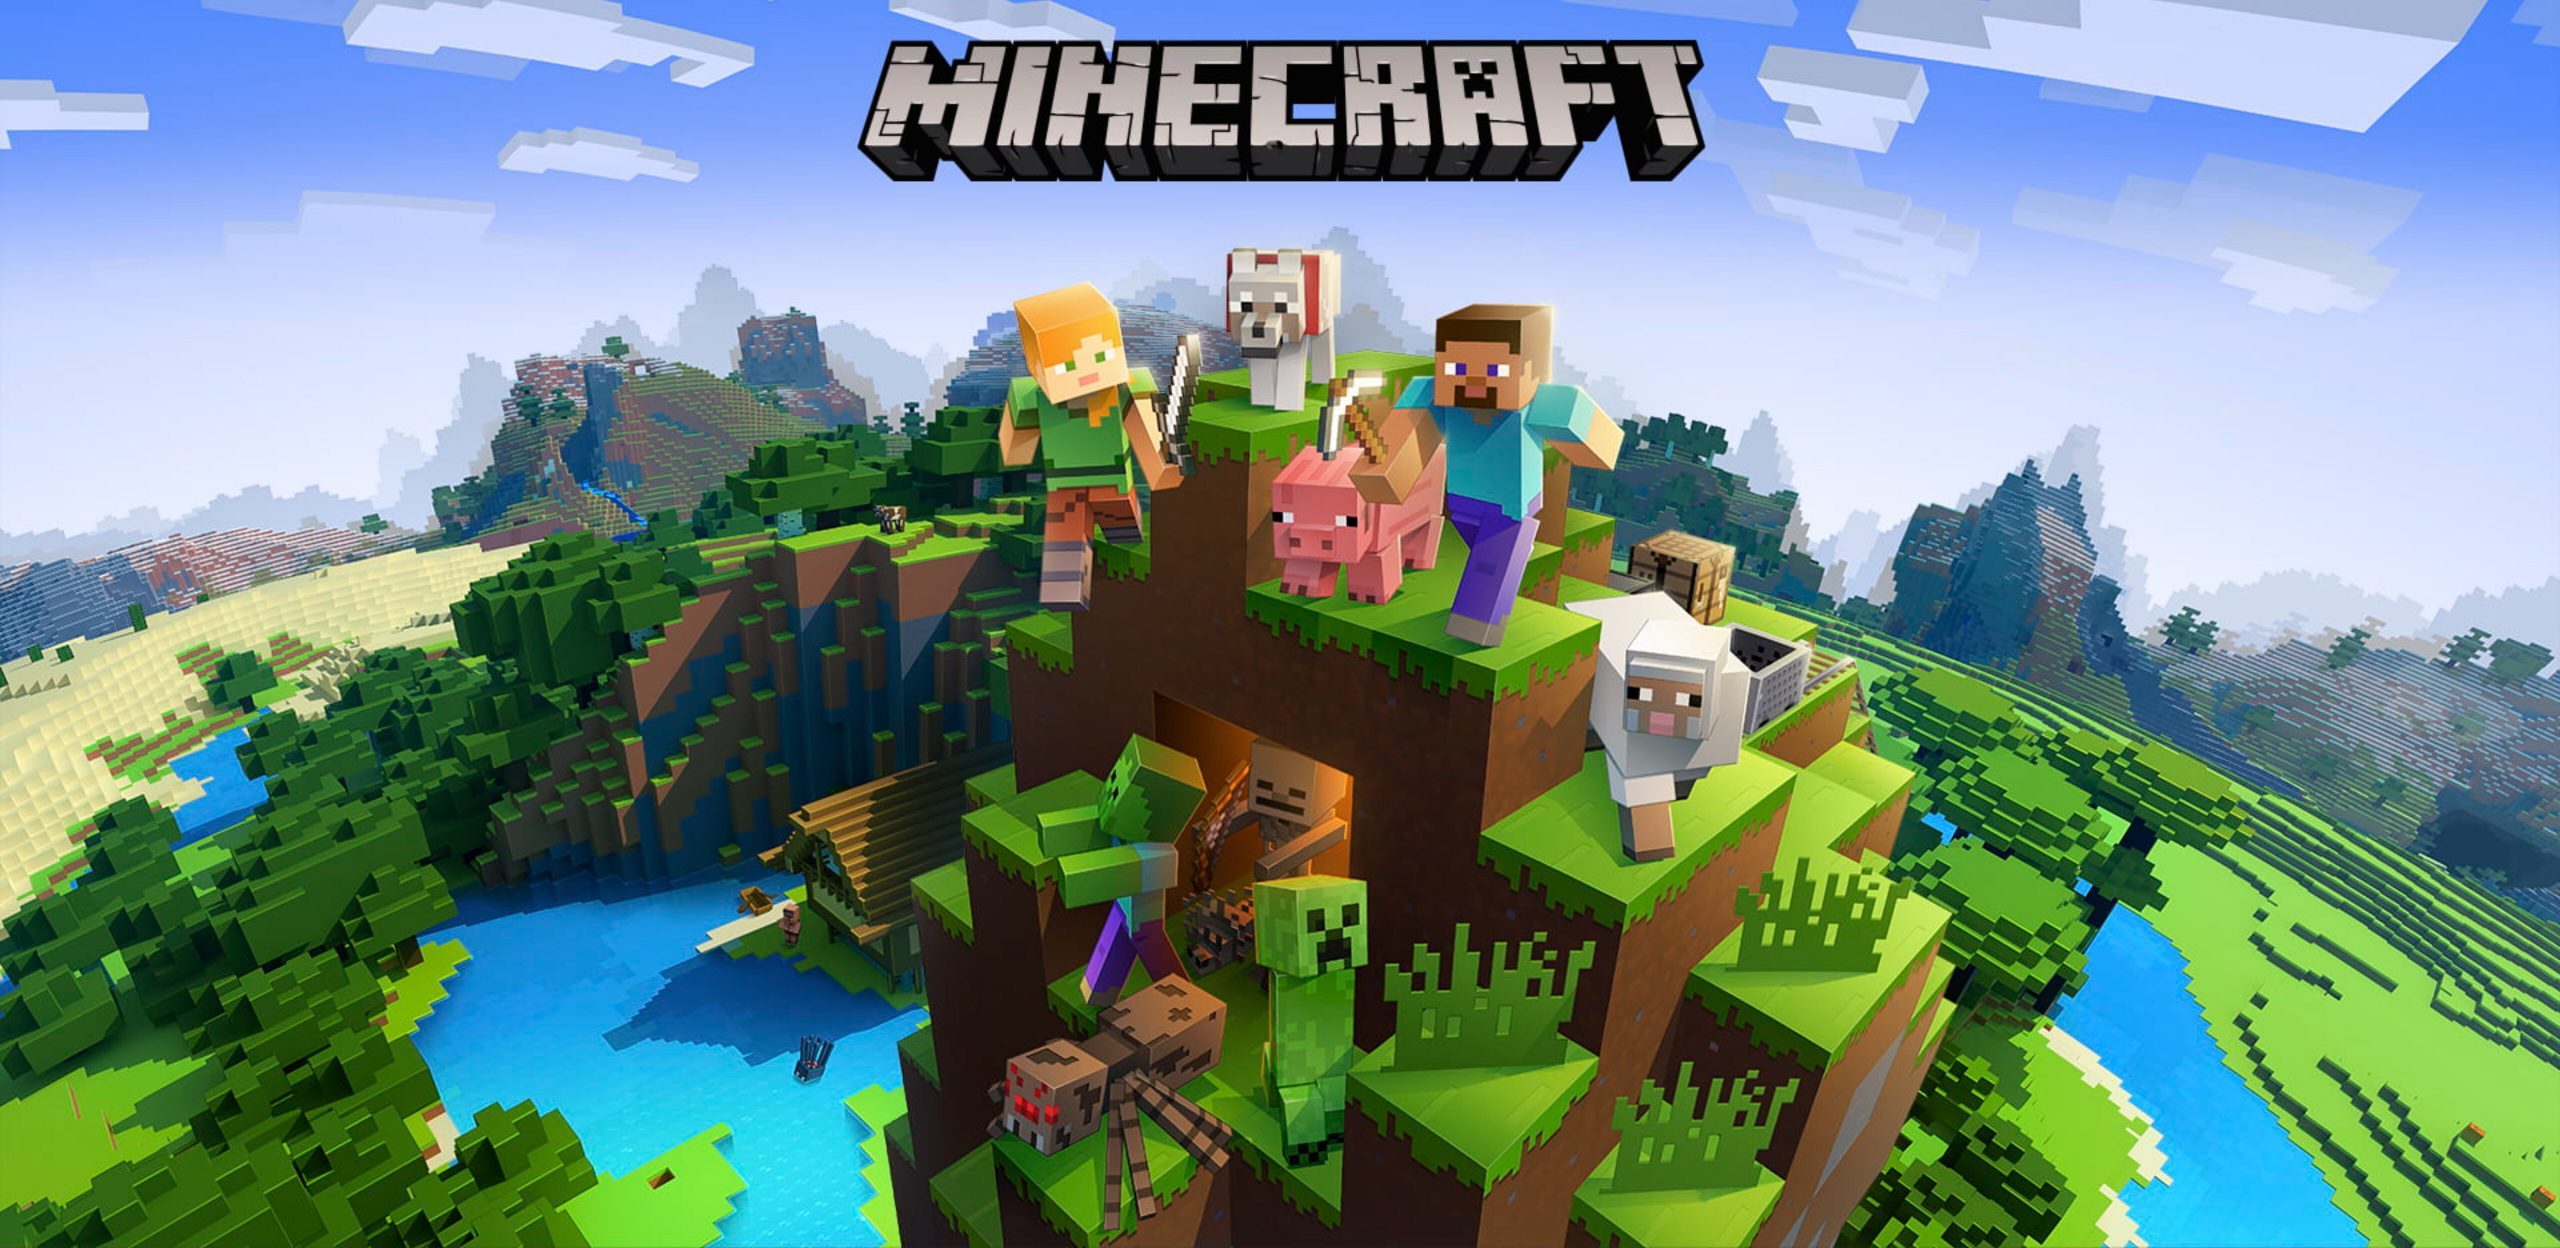 Game On! Minecraft: Bedrock Edition Takes Chromebooks By Storm